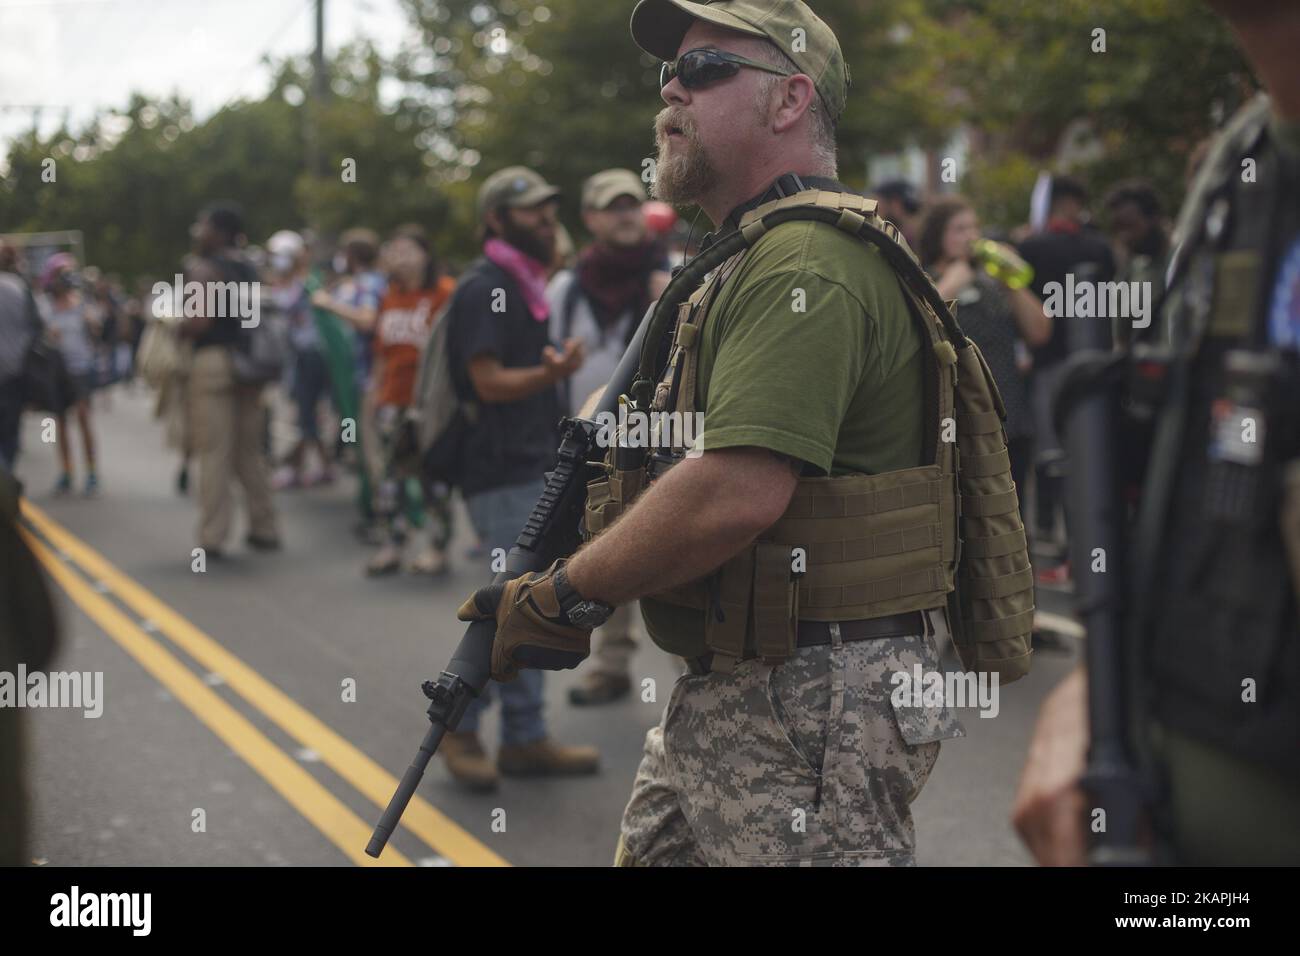 There were dozens of protesters with large rifles present at the Unite The Right rally on August 12, 2017 in Charlottesville, Virginia, USA. The White Supremacists/Alt Right supporters were forcibly removed by police. (Photo by Shay Horse/NurPhoto) *** Please Use Credit from Credit Field *** Stock Photo